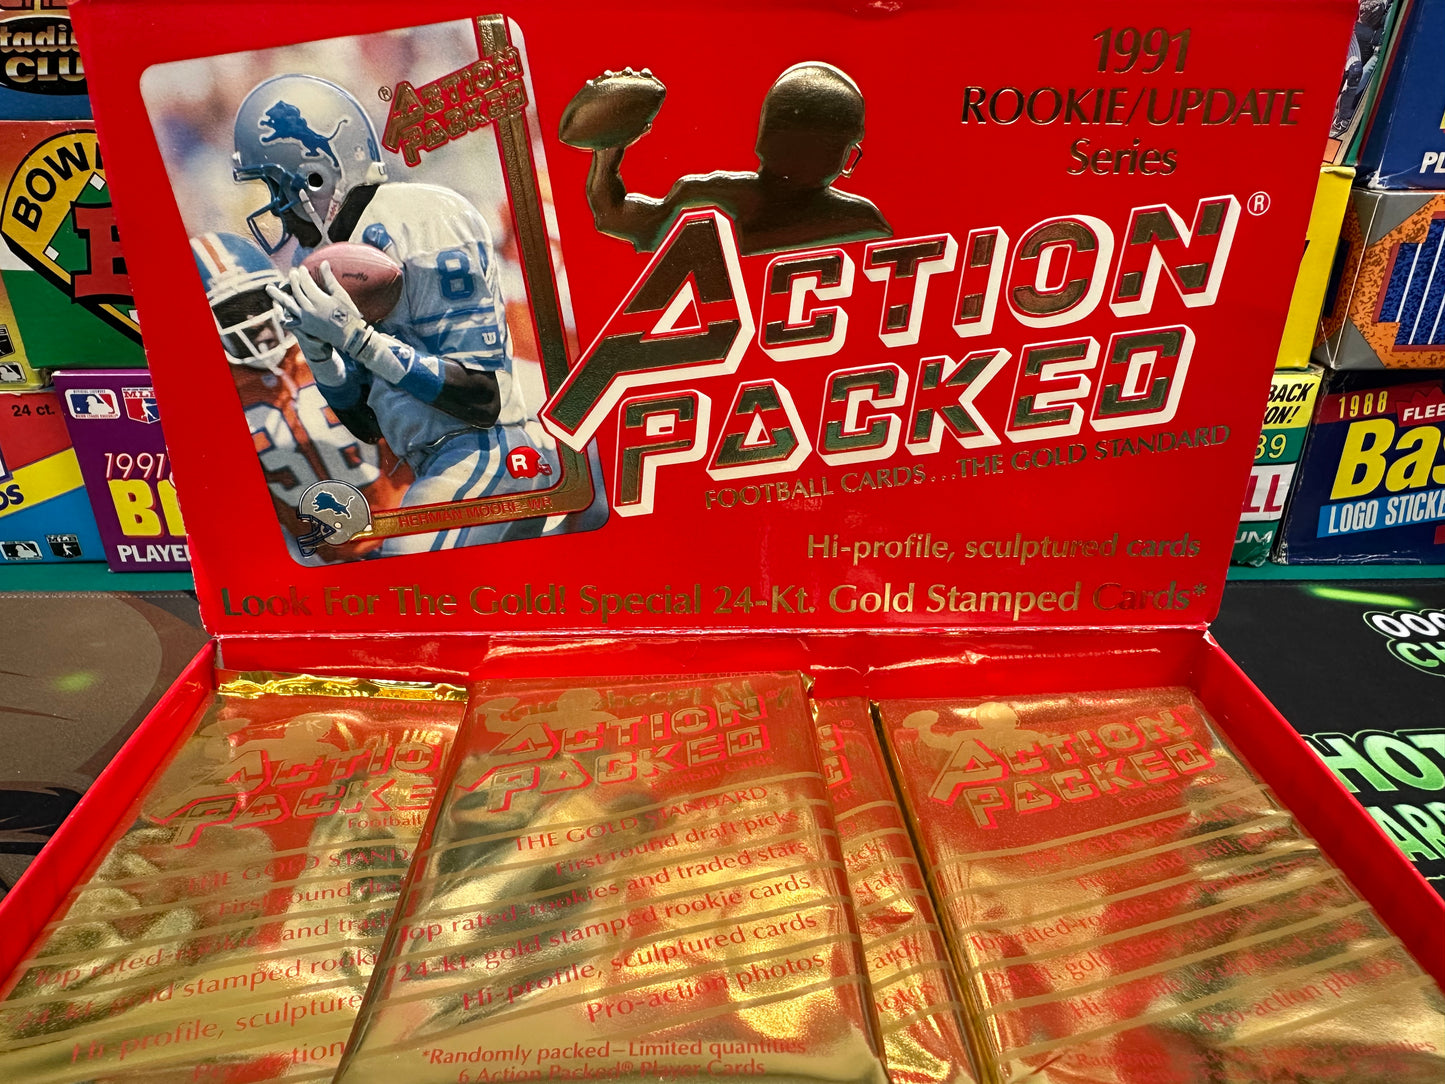 1991 Action Packed Football Rookie Update Pack